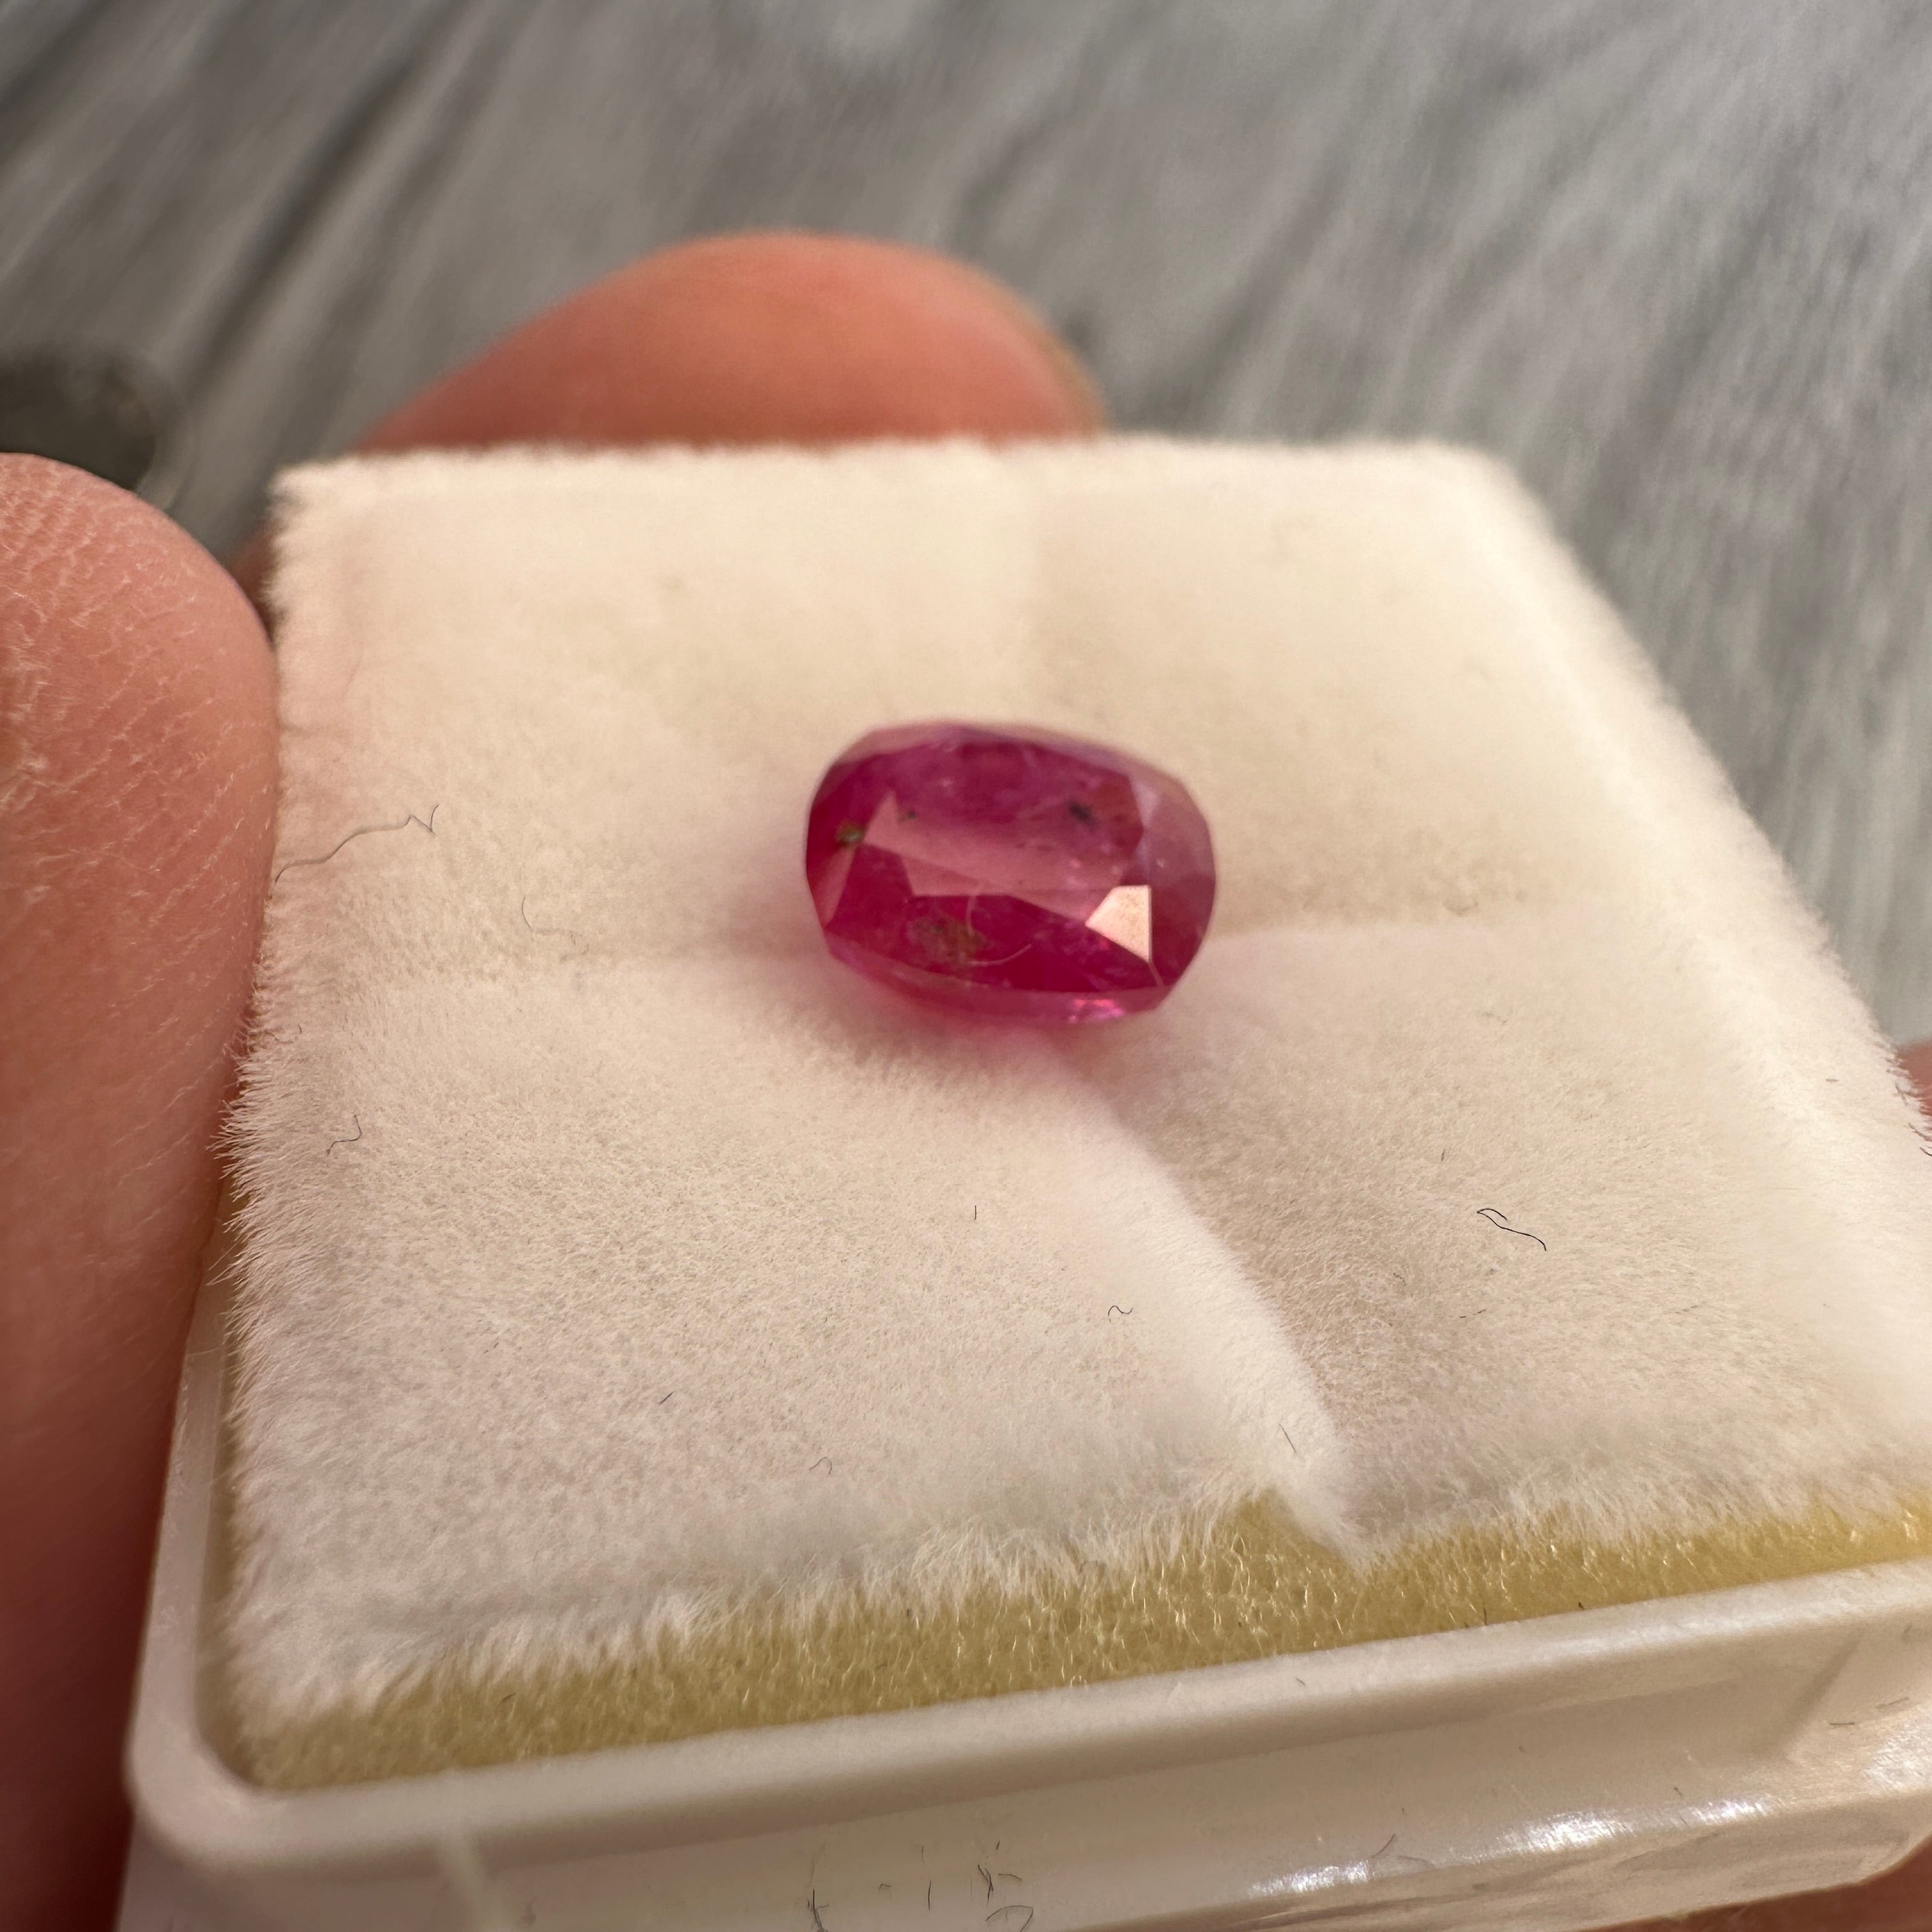 1.89ct Winza Ruby, Tanzania, Untreated, Unheated. Has inclusions